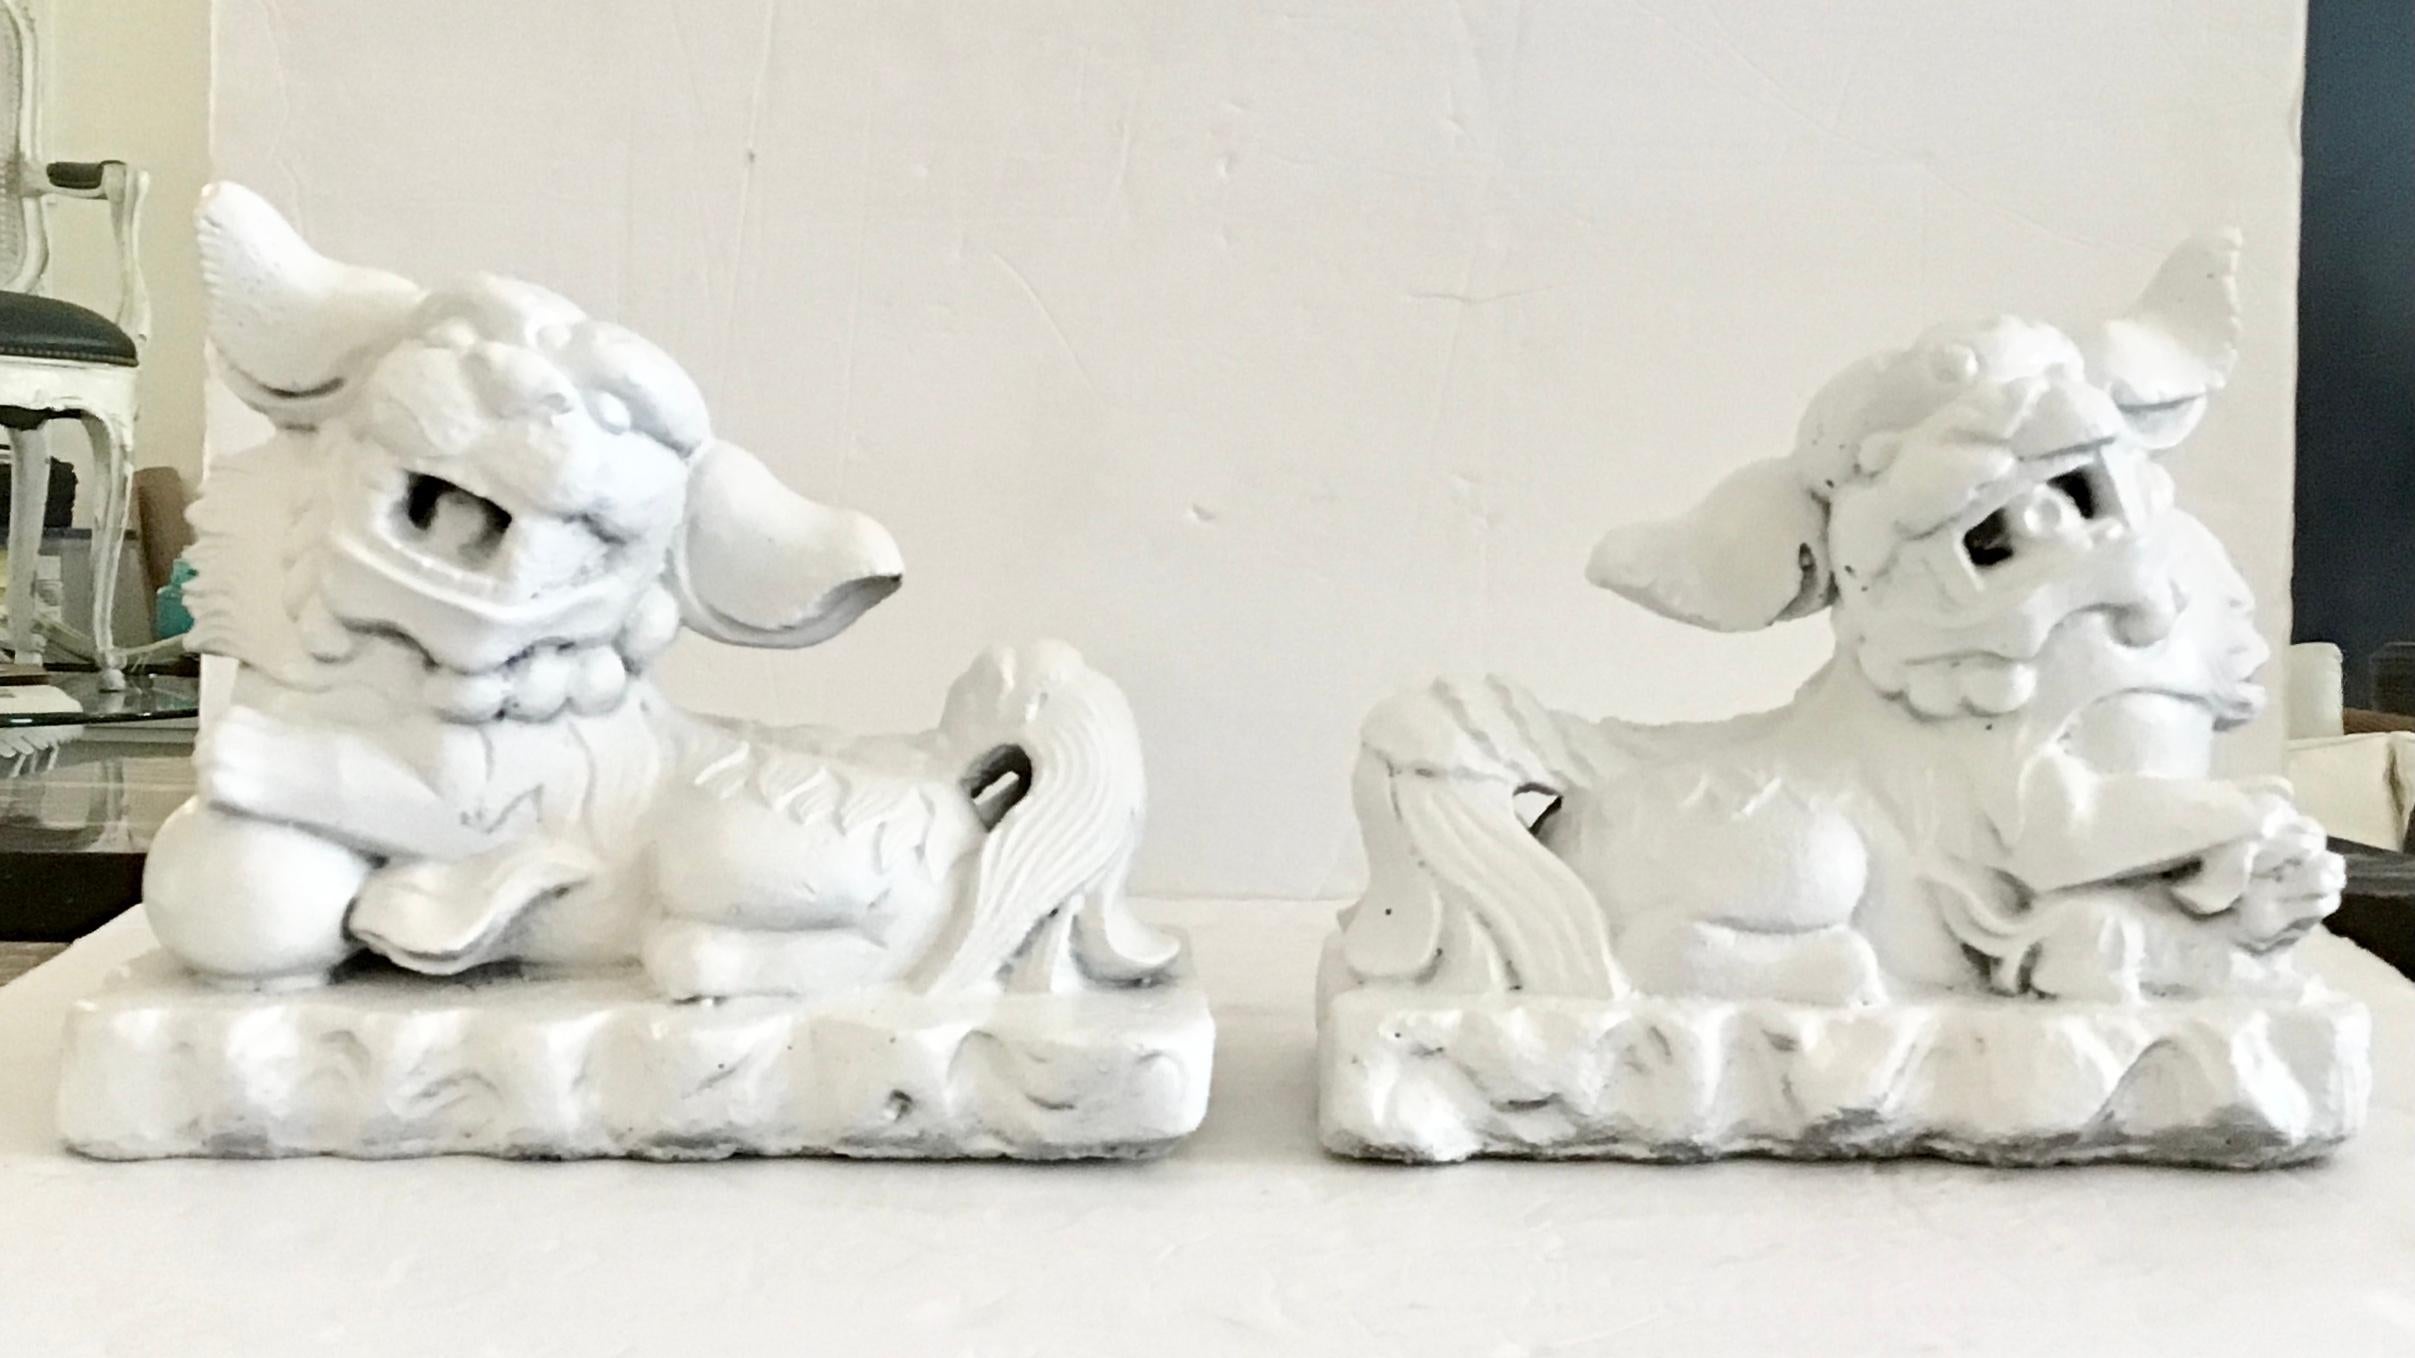 Pair of heavy weight cast stone foo dogs freshly lacquered in white. Great addition to your chinoiserie inspired interiors and table tops. Each piece is very heavy for its size. Amazing details!